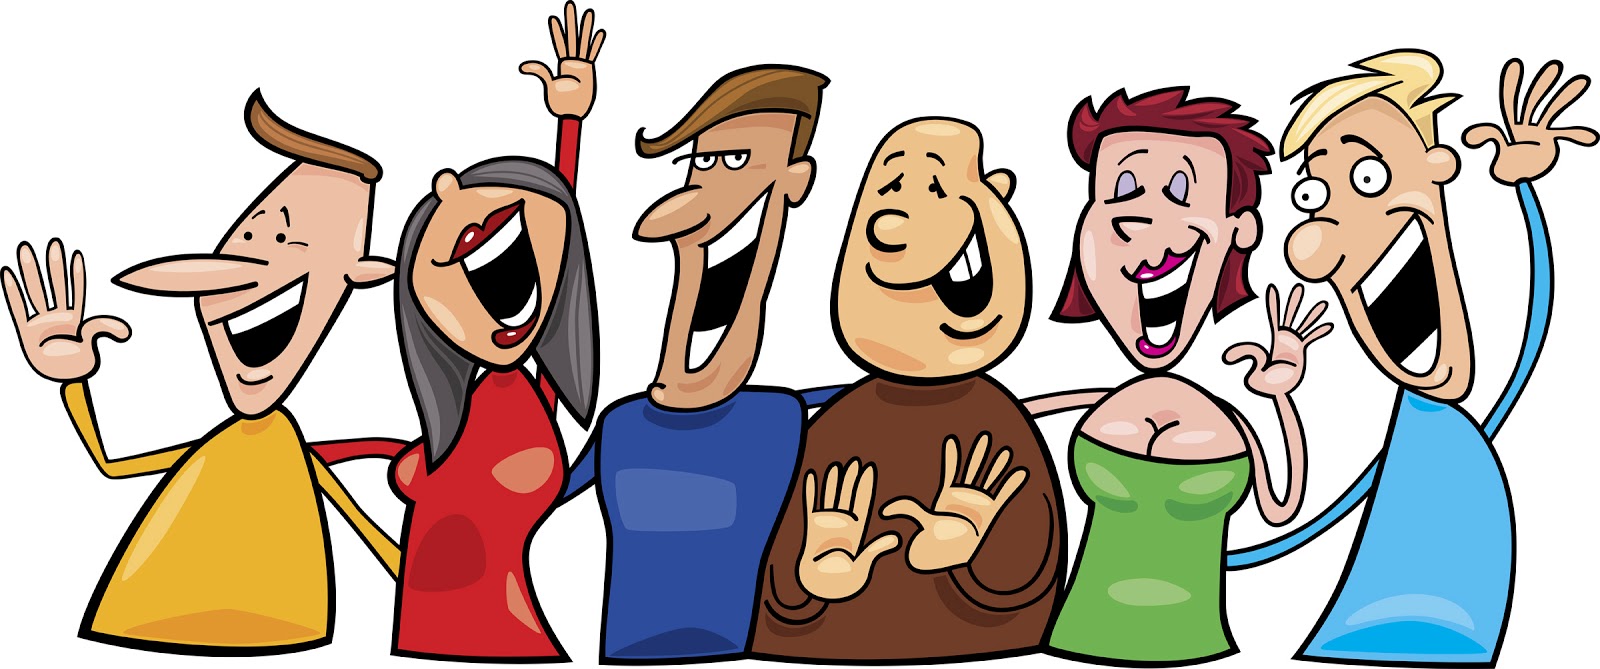 Joyful Expressions New Employ - Happy People Clipart